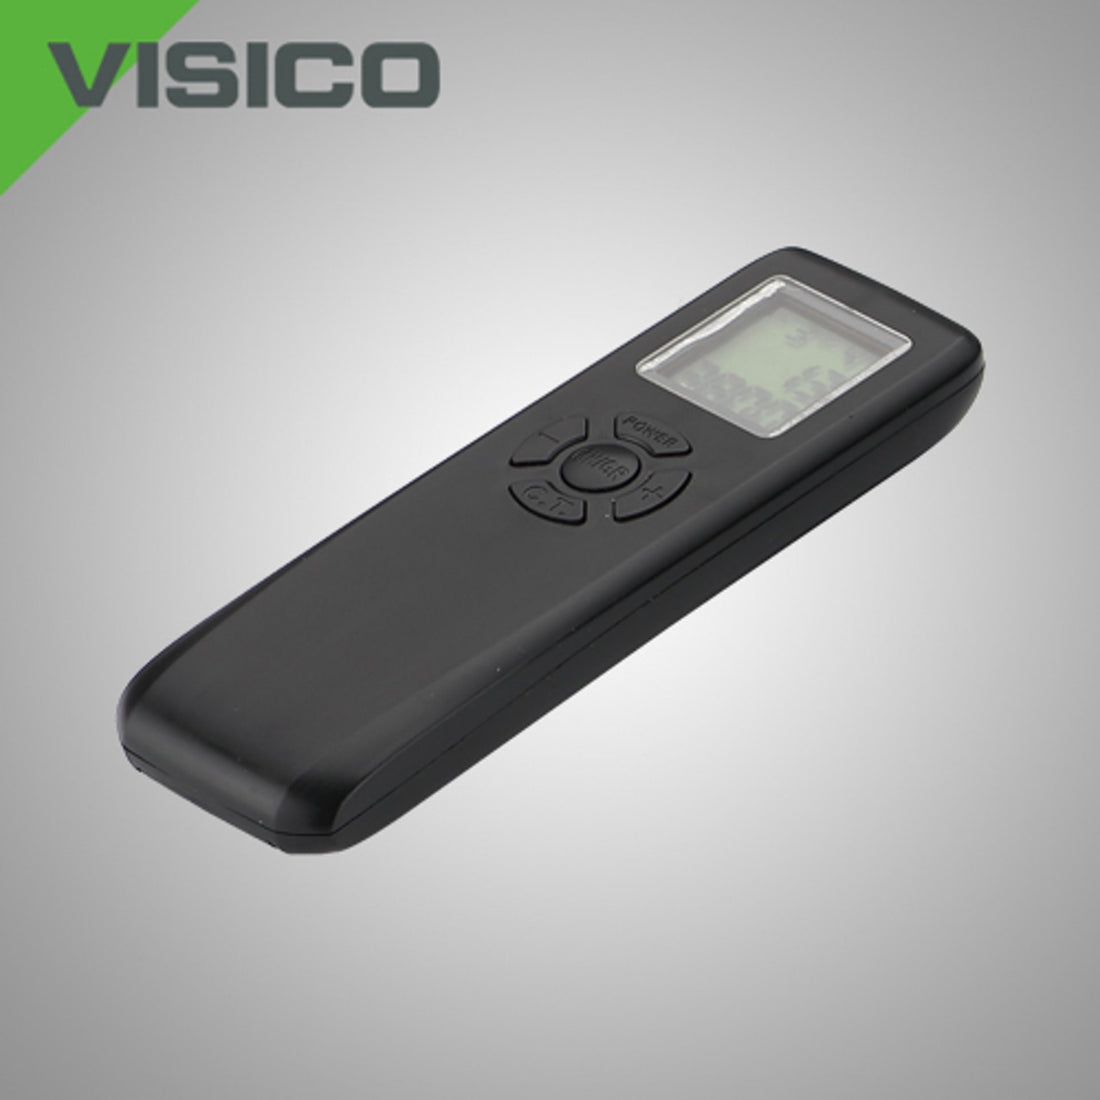 Visico VC-501TX Remote Control -For LED 25 And 50 Panel